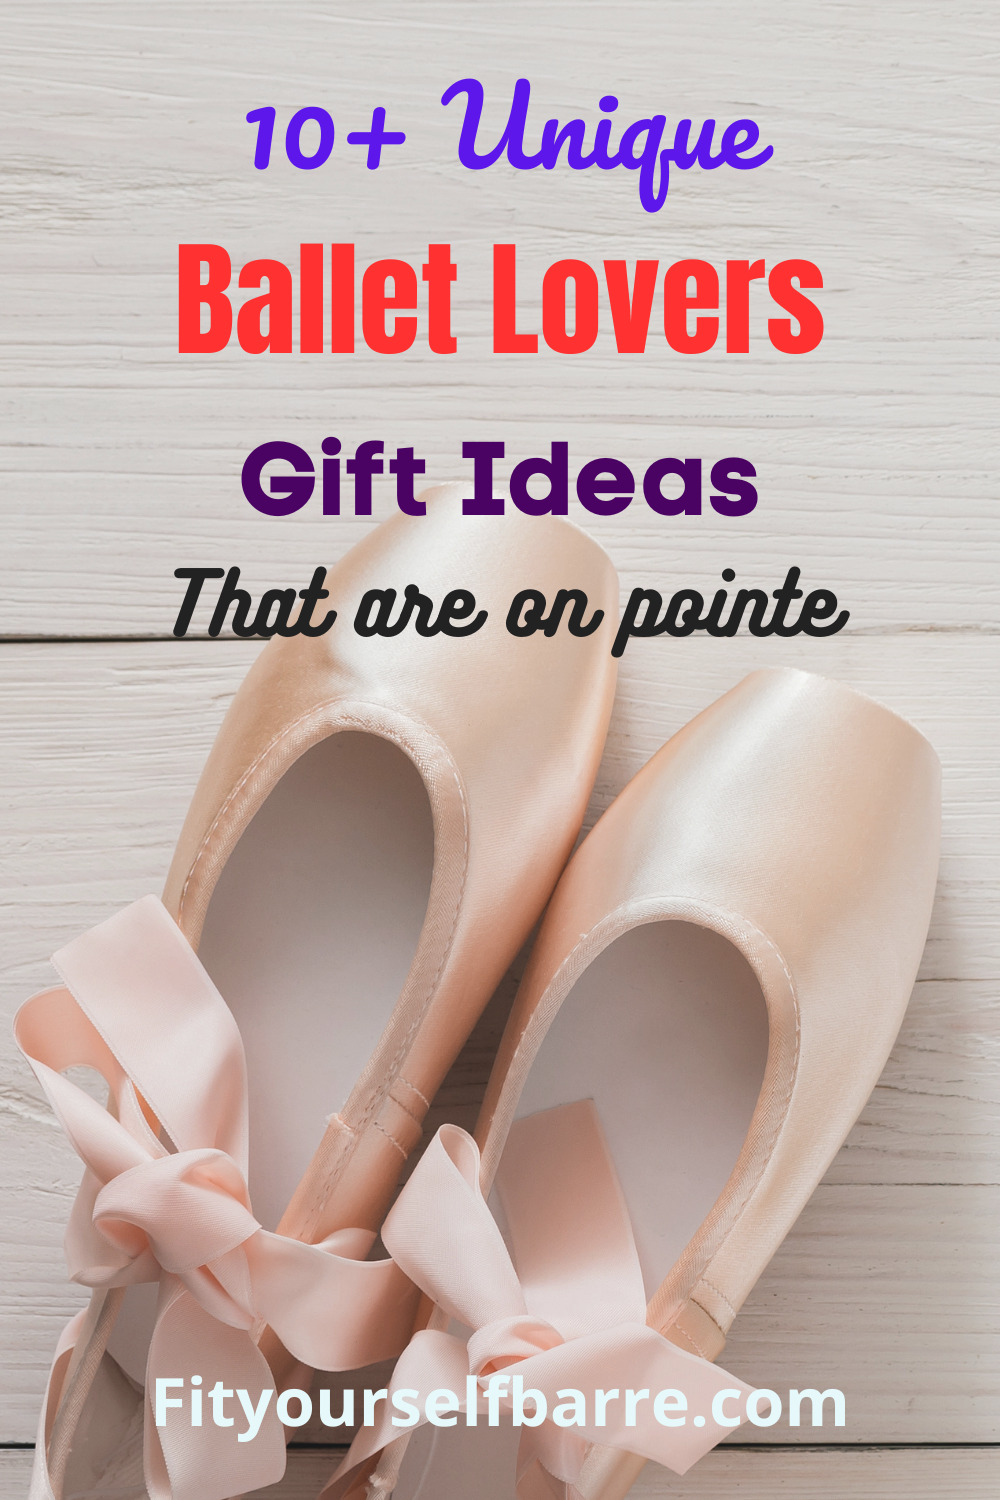 ballet lovers gift ideas-pastel pink ballet pointe shoes background